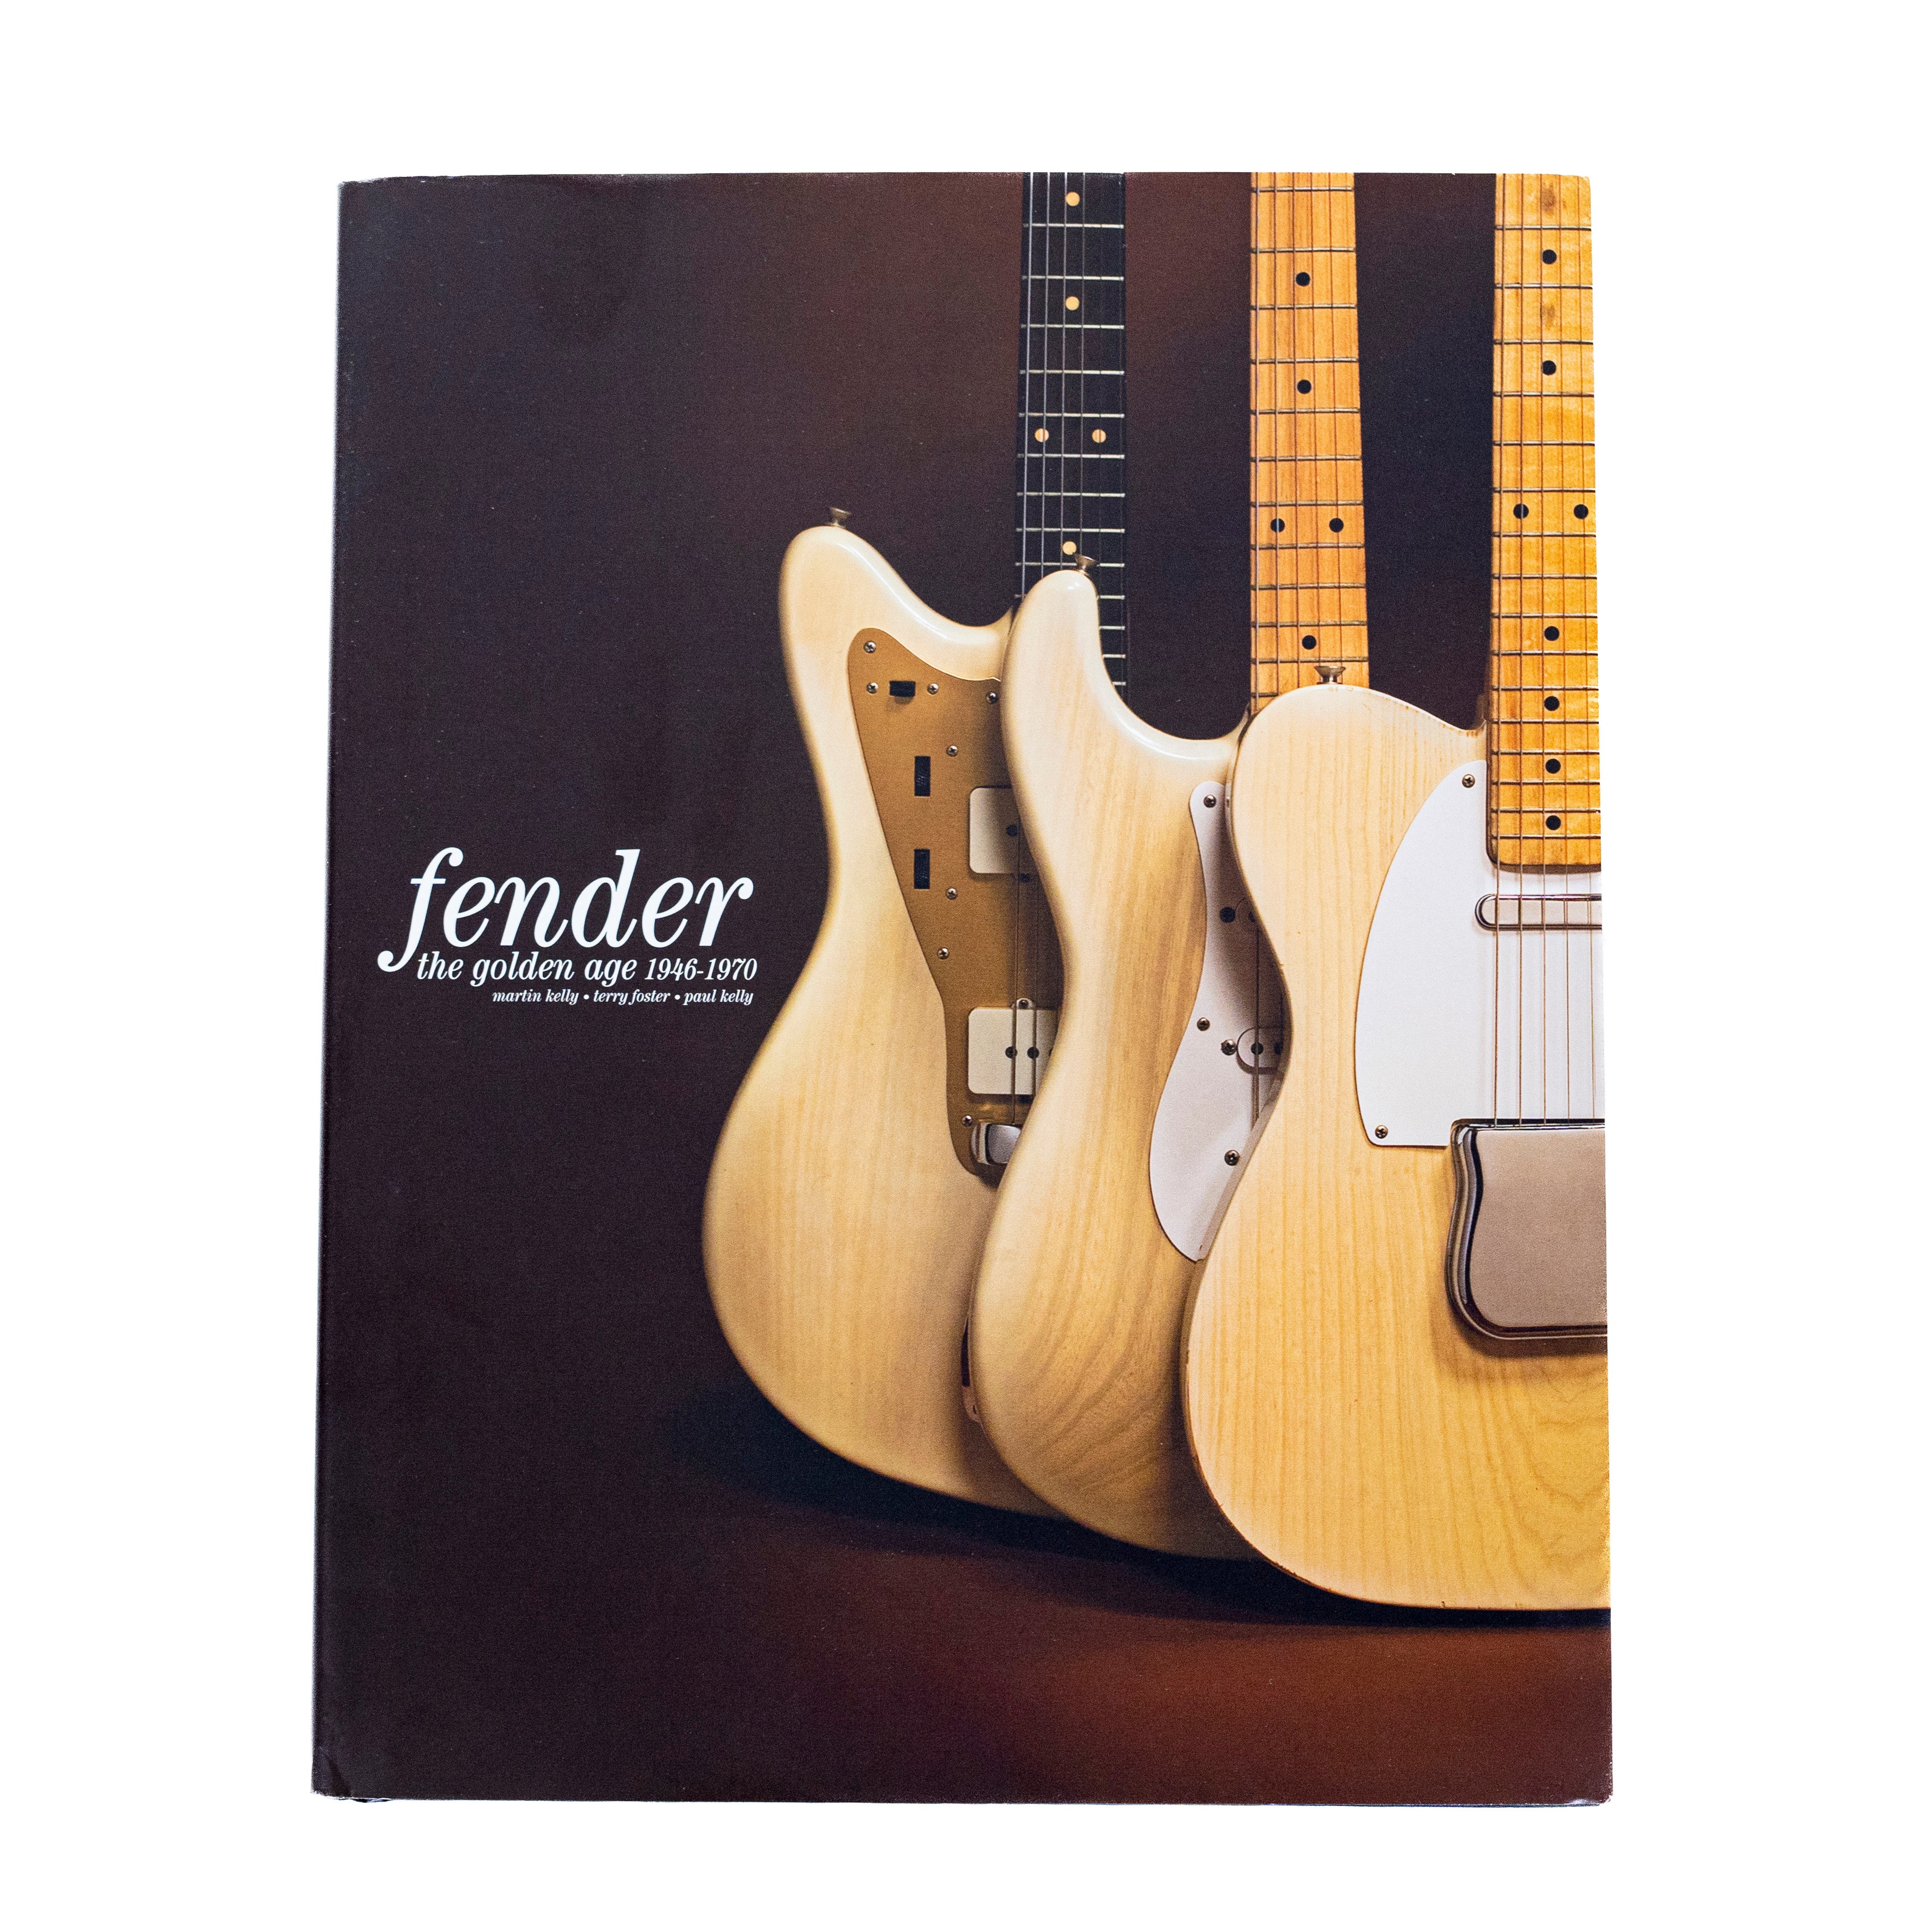 Fender: The Golden Age 1946-1970 - Hardcover Book by Terry Foster